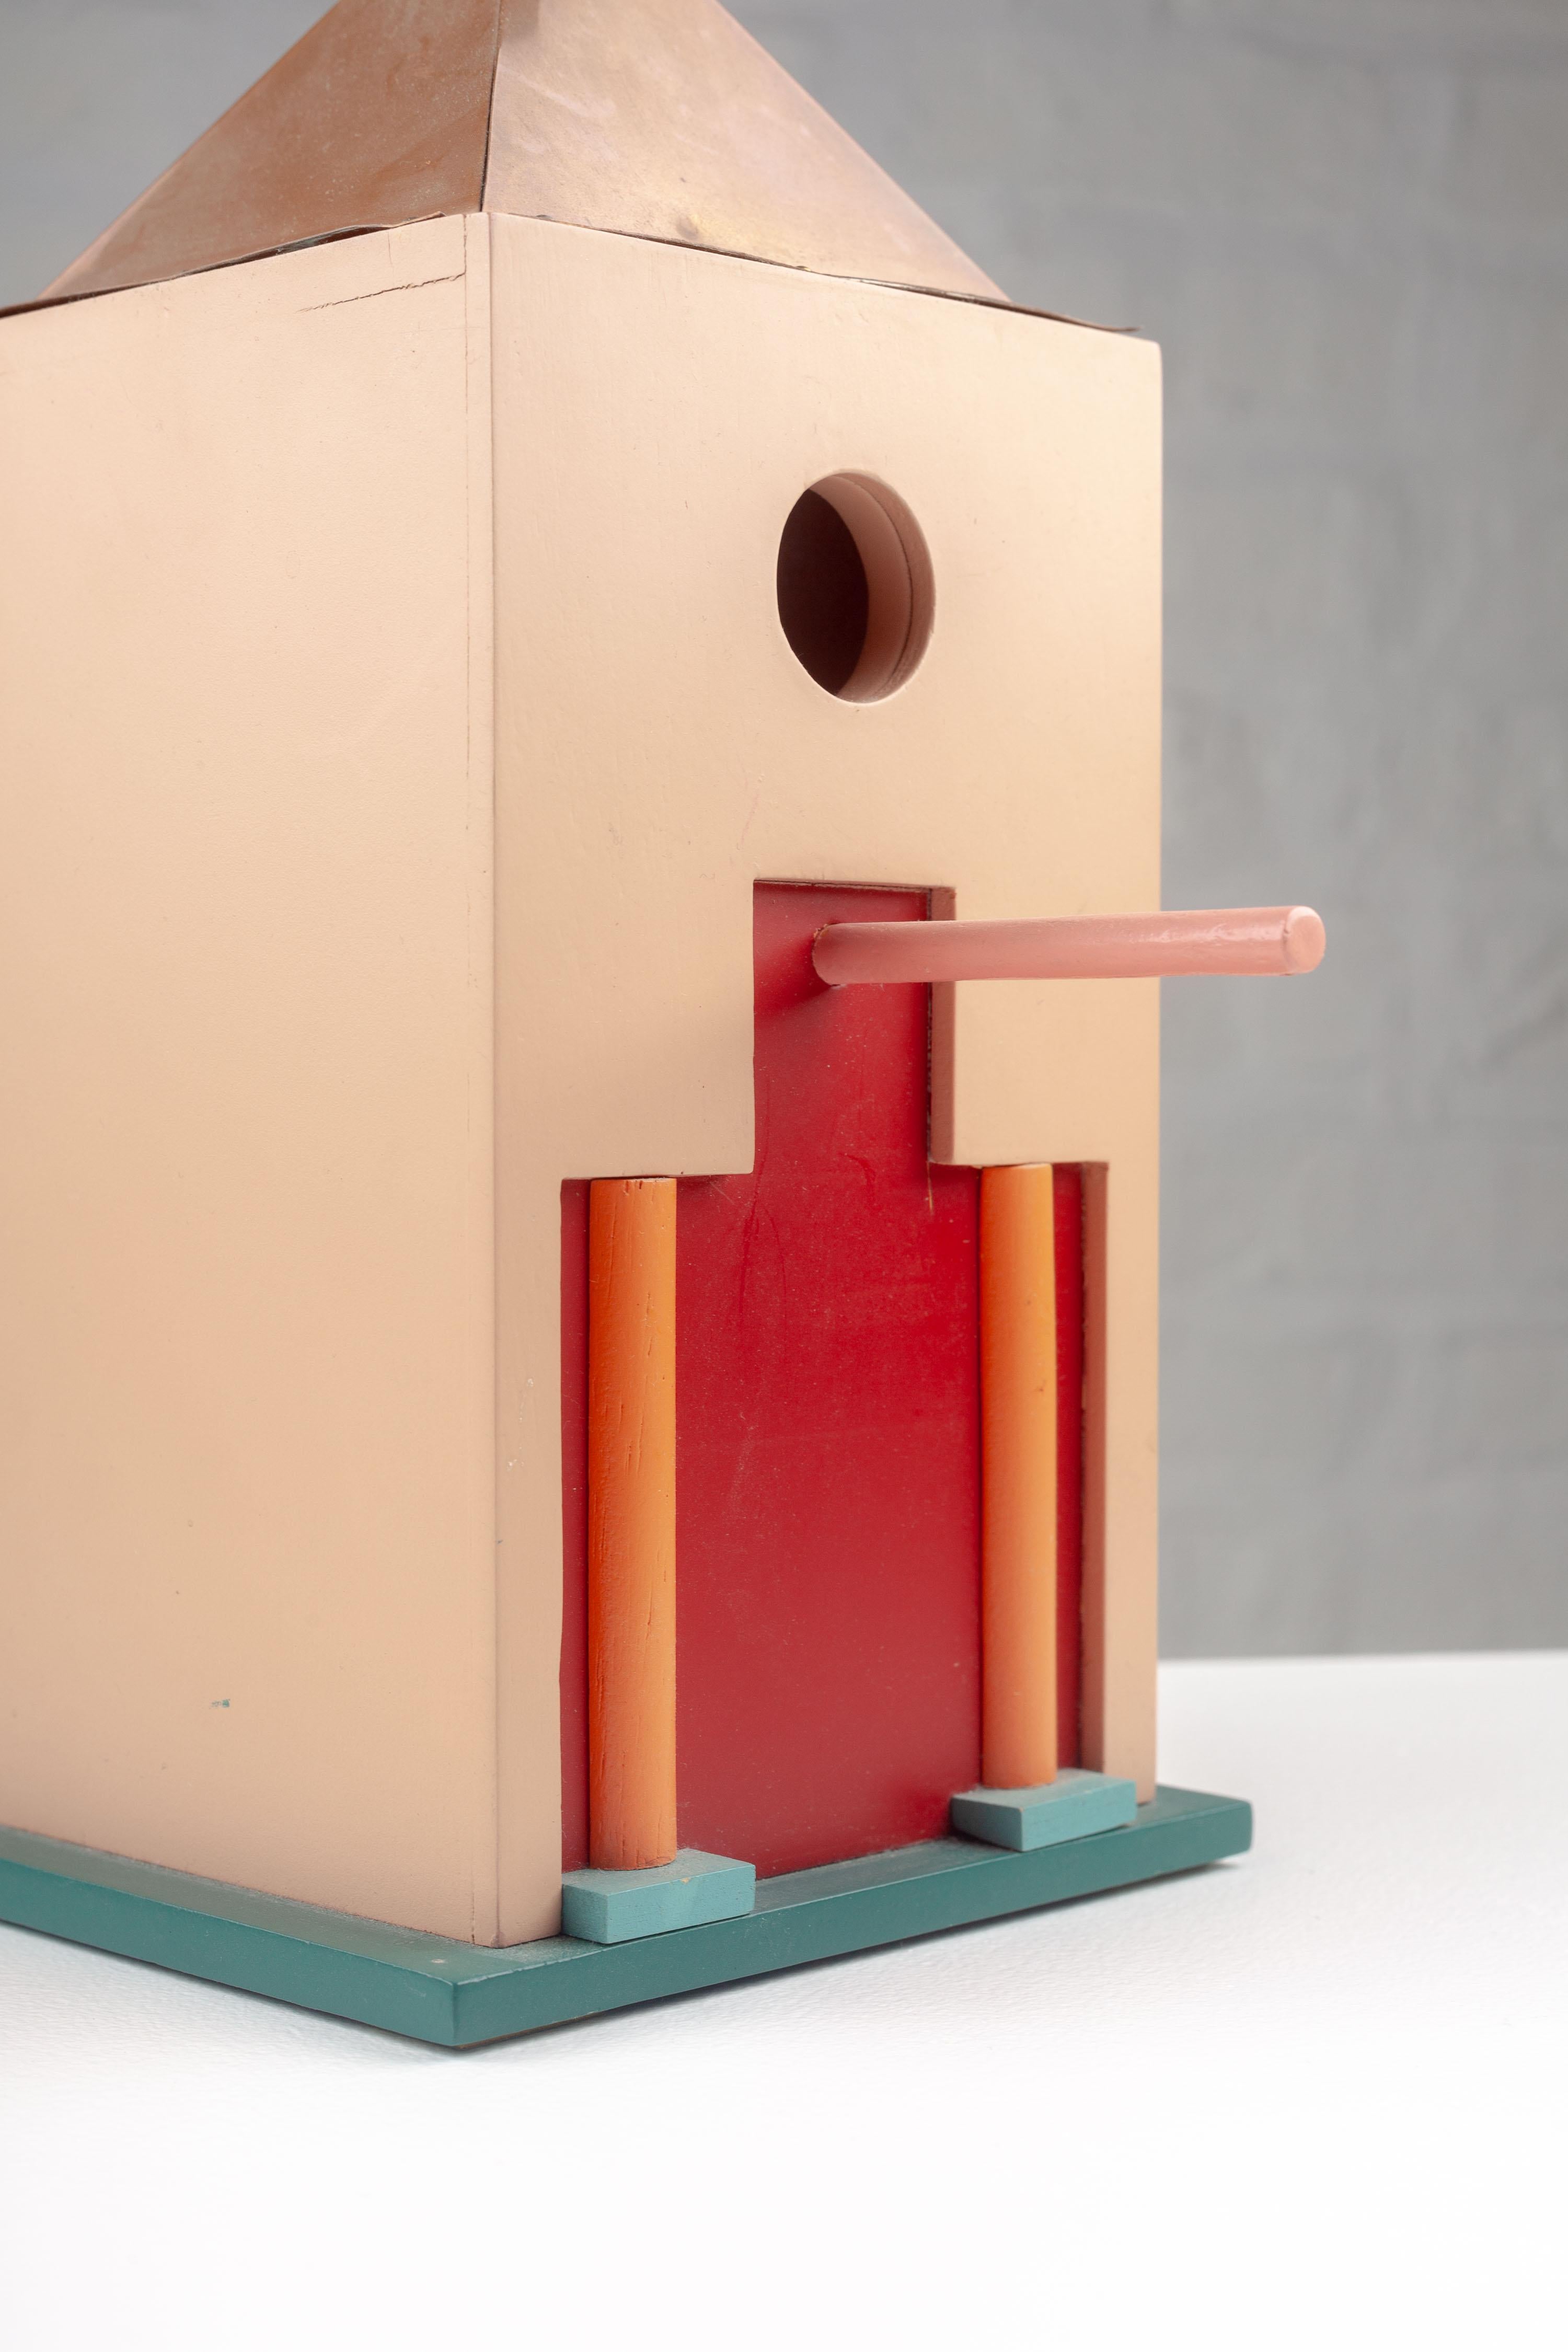 Painted Post-modern Birdhouse in the style of Aldo Rossi, Milano Series For Sale